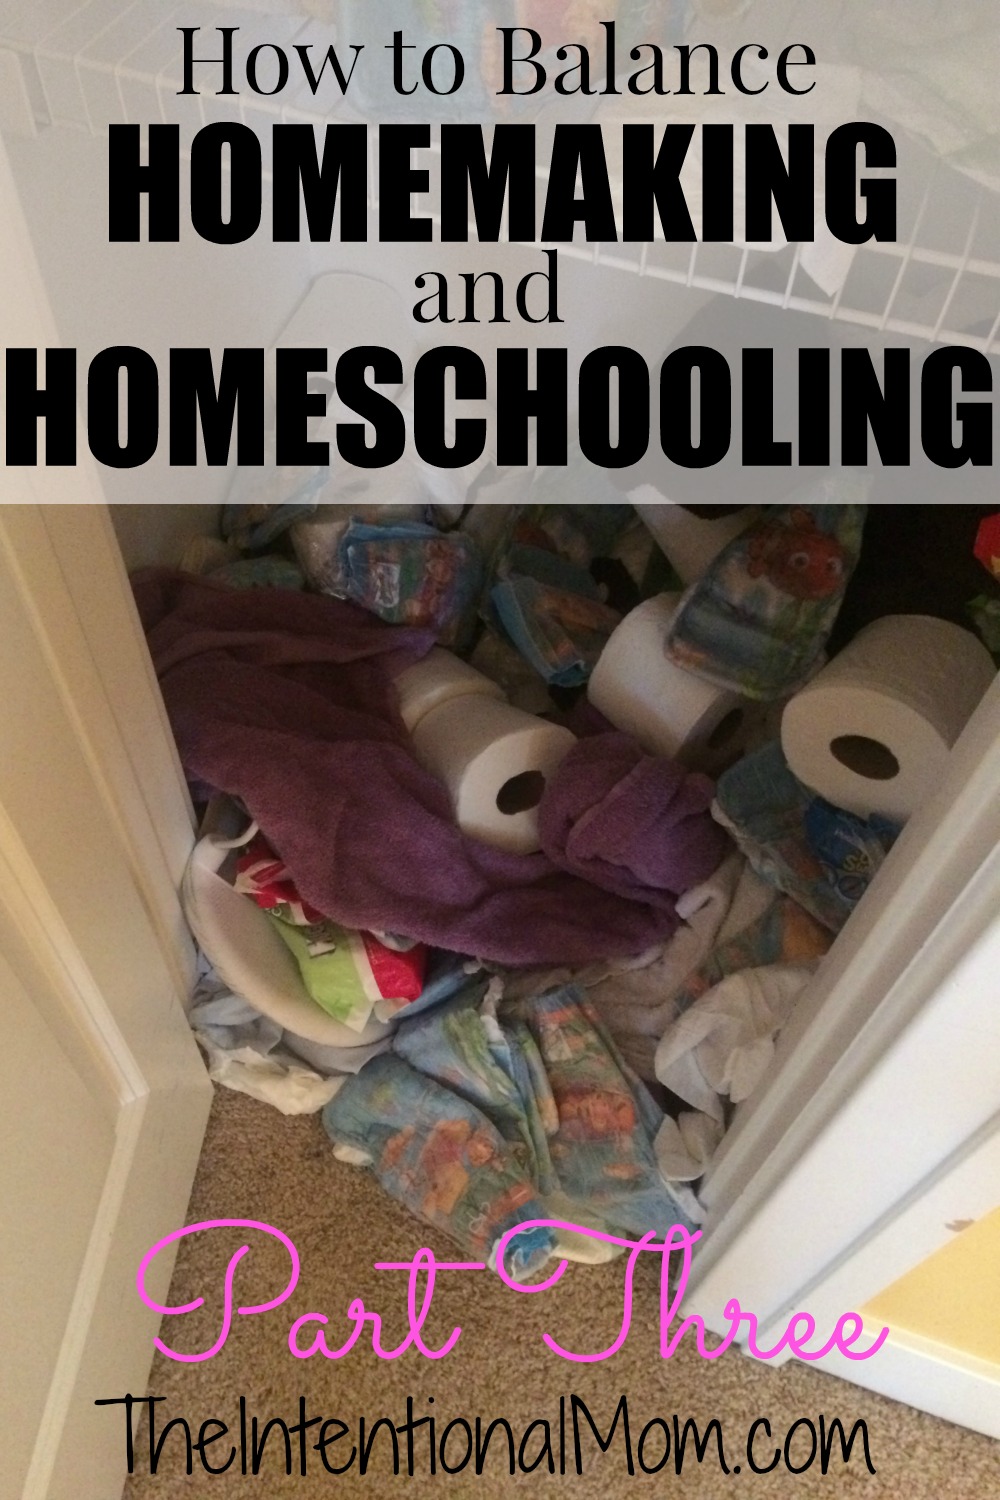 How to Balance Homemaking and Homeschooling Part Three